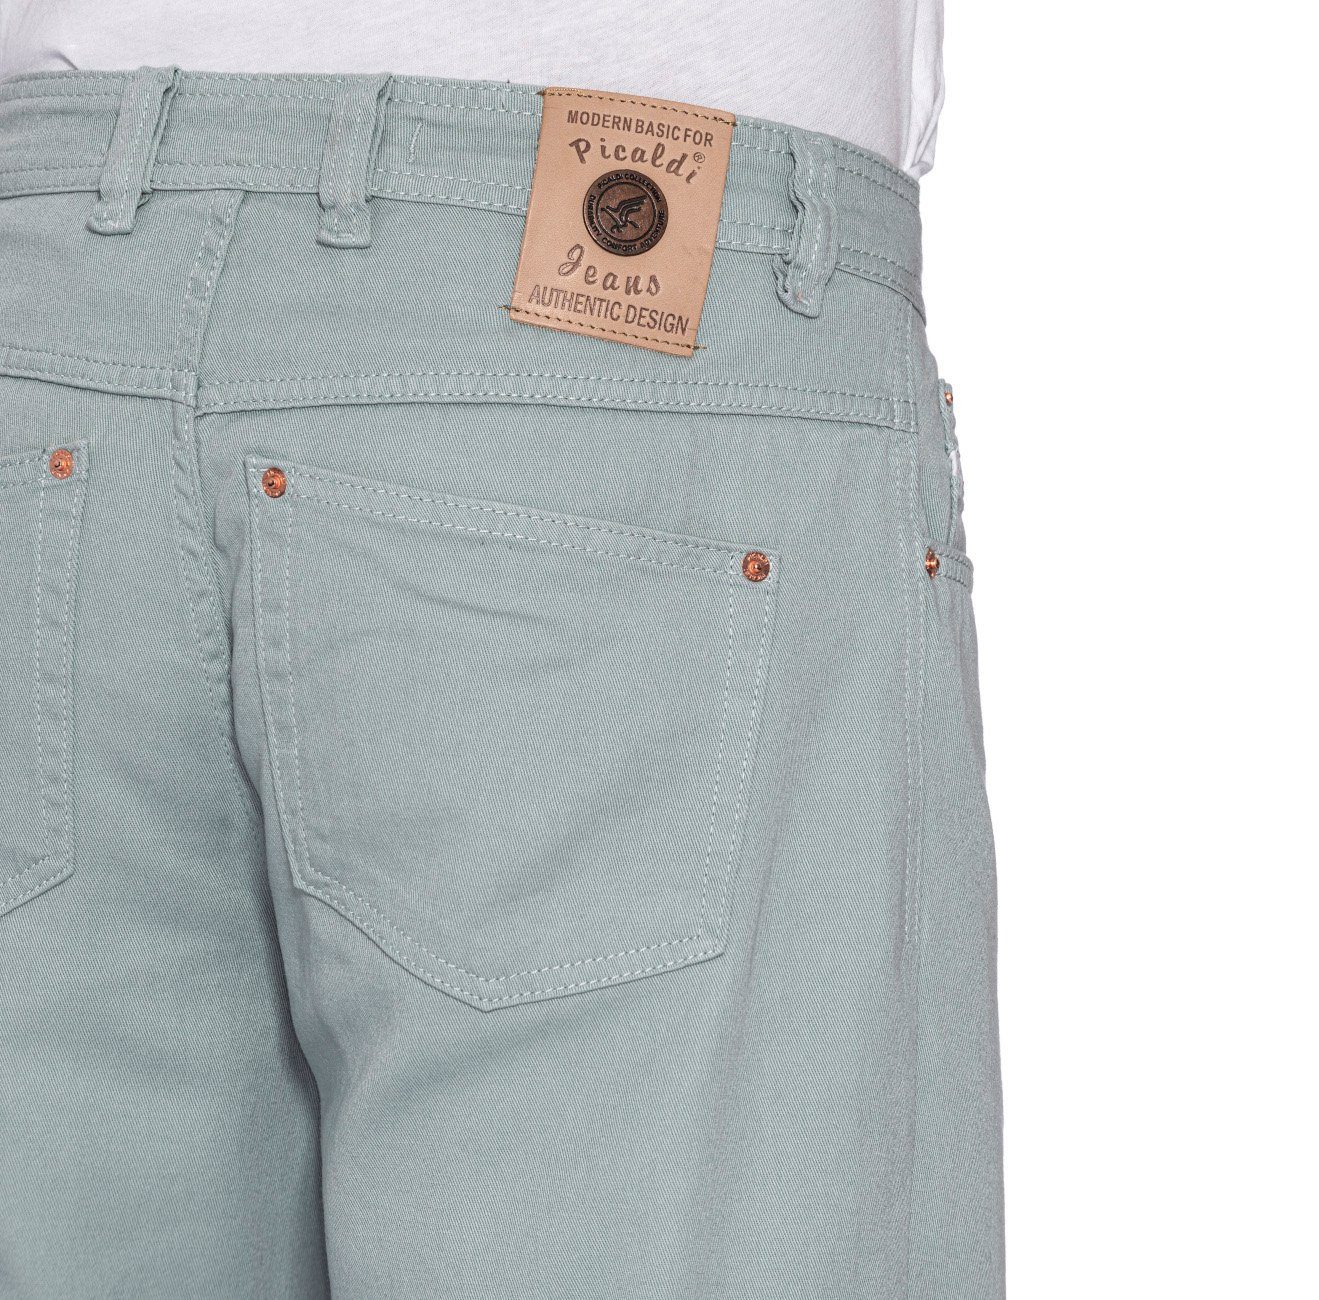 PICALDI Jeans 472 Turquoise Loose Fit, Relaxed Tapered-fit-Jeans Zicco Fit, Sommerhose, Gabardine Freizeithose